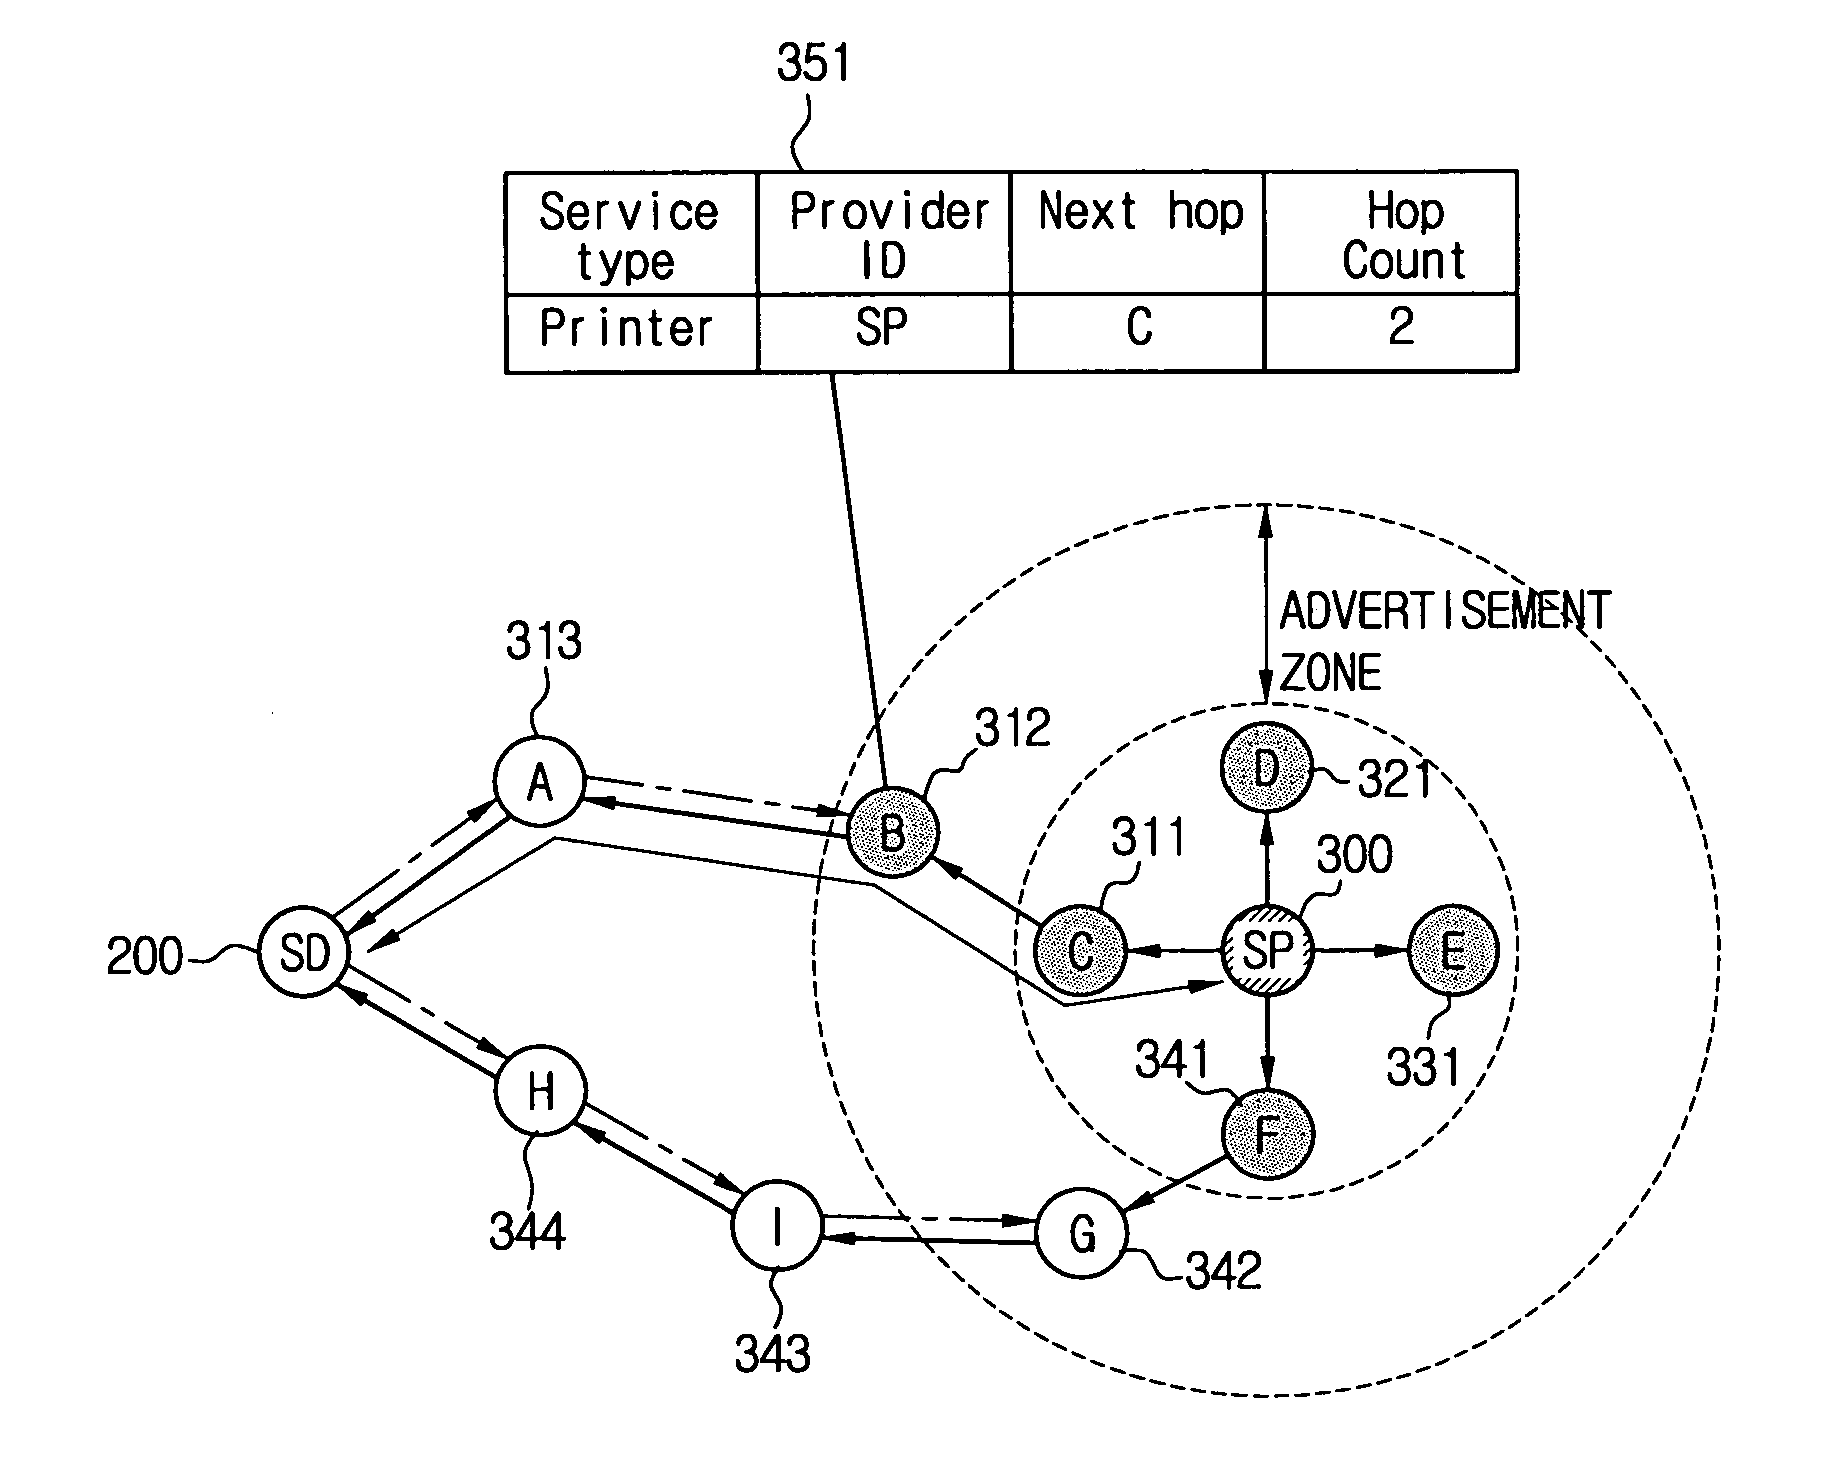 Method for service discovery in mobile ad-hoc network